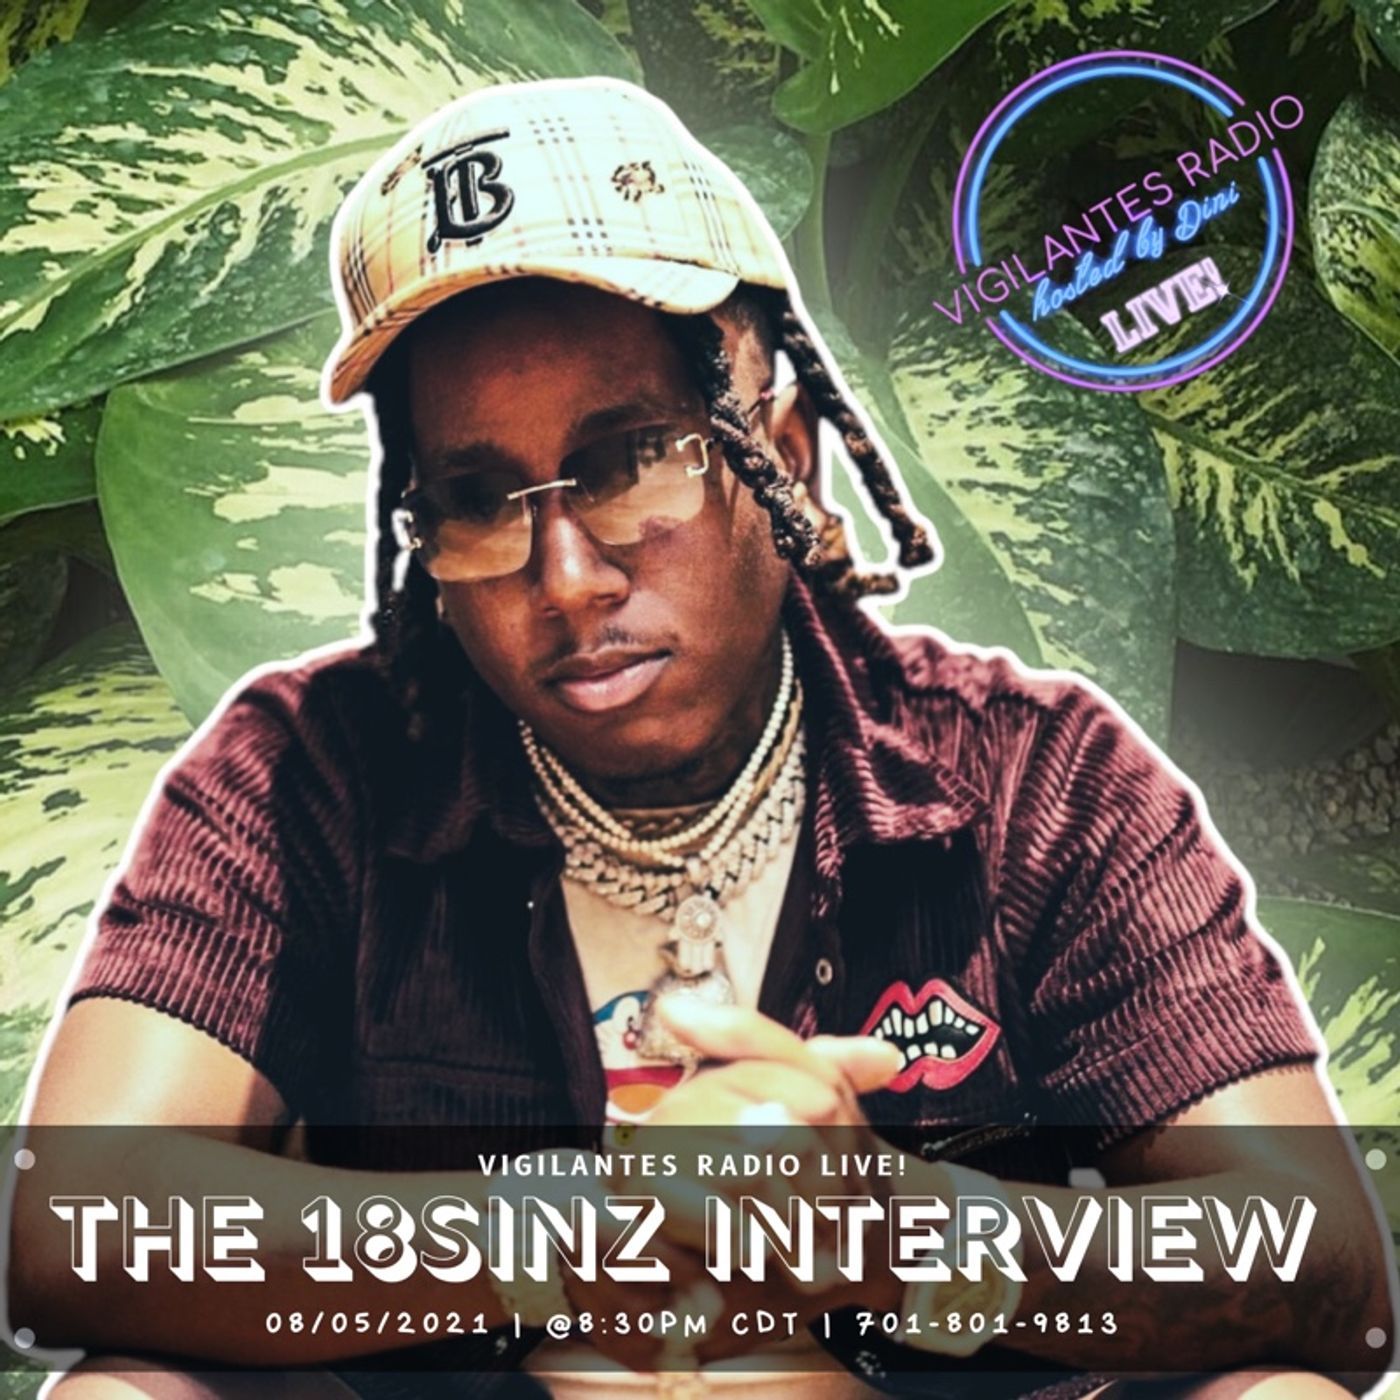 The 18Sinz Interview. Image